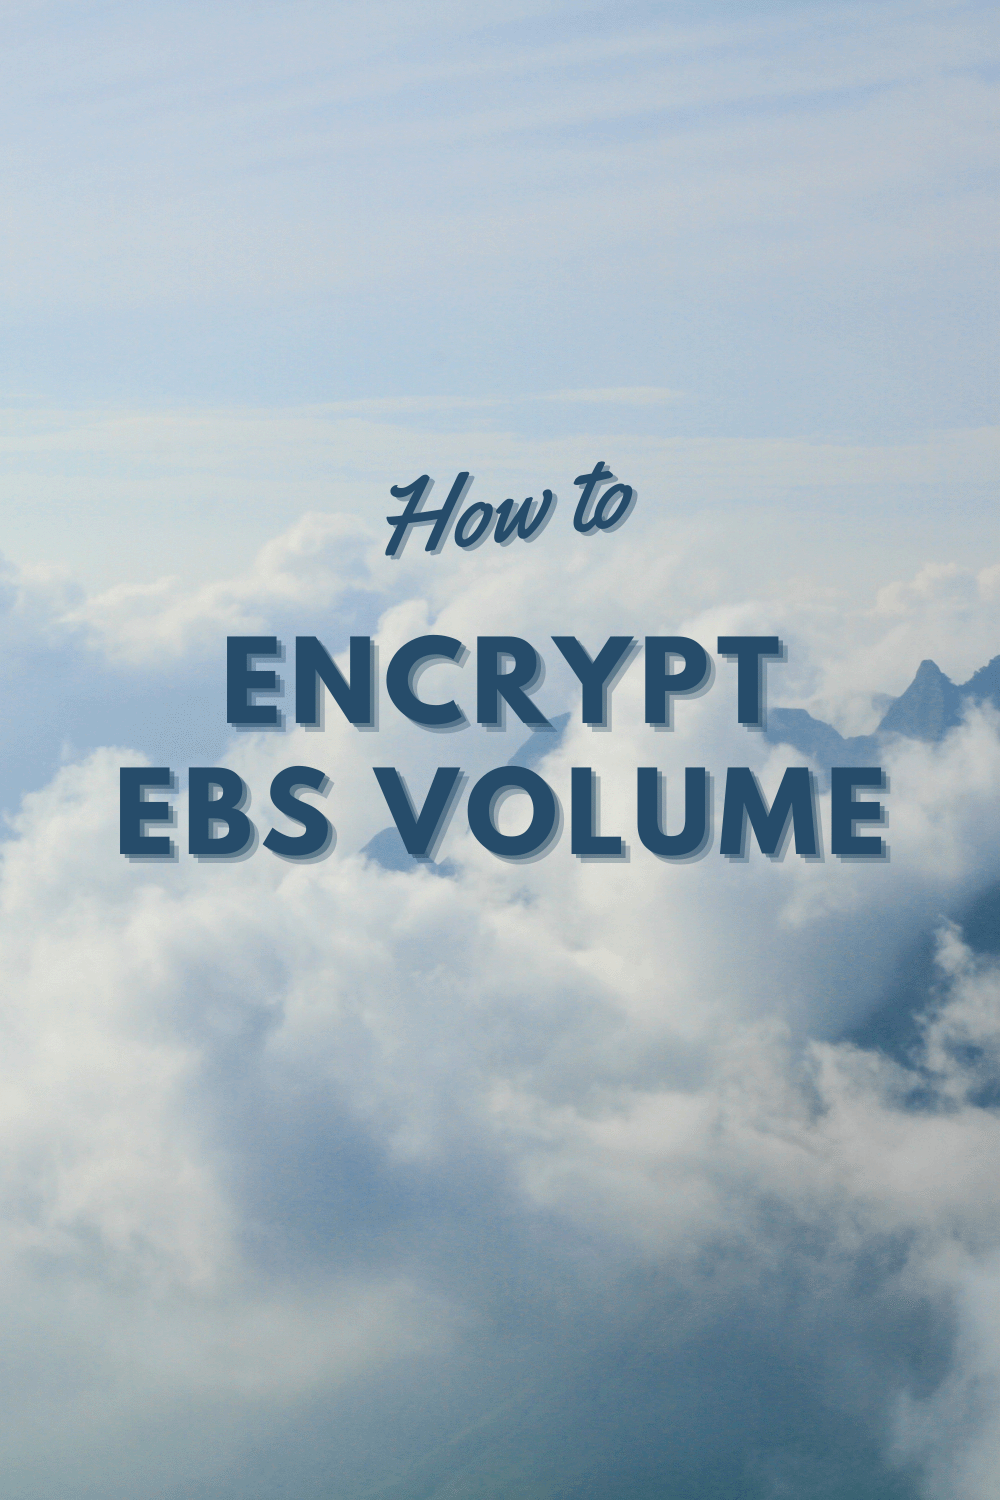 How to encrypt EBS volume to secure your data